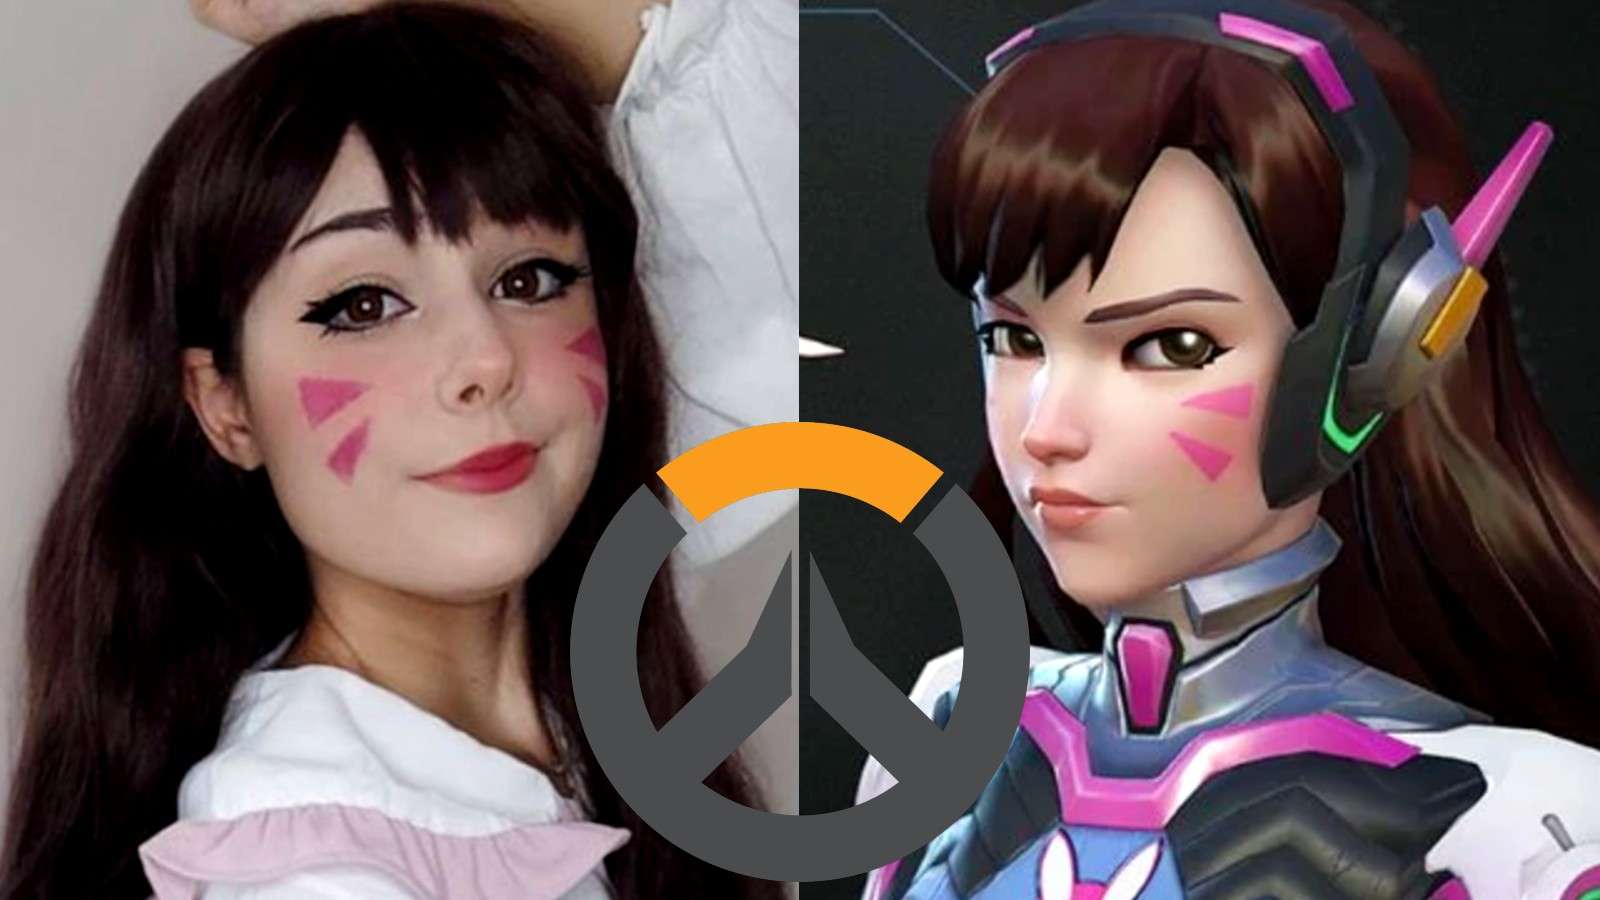 Cosplayer nymphahri as D.Va from Overwatch